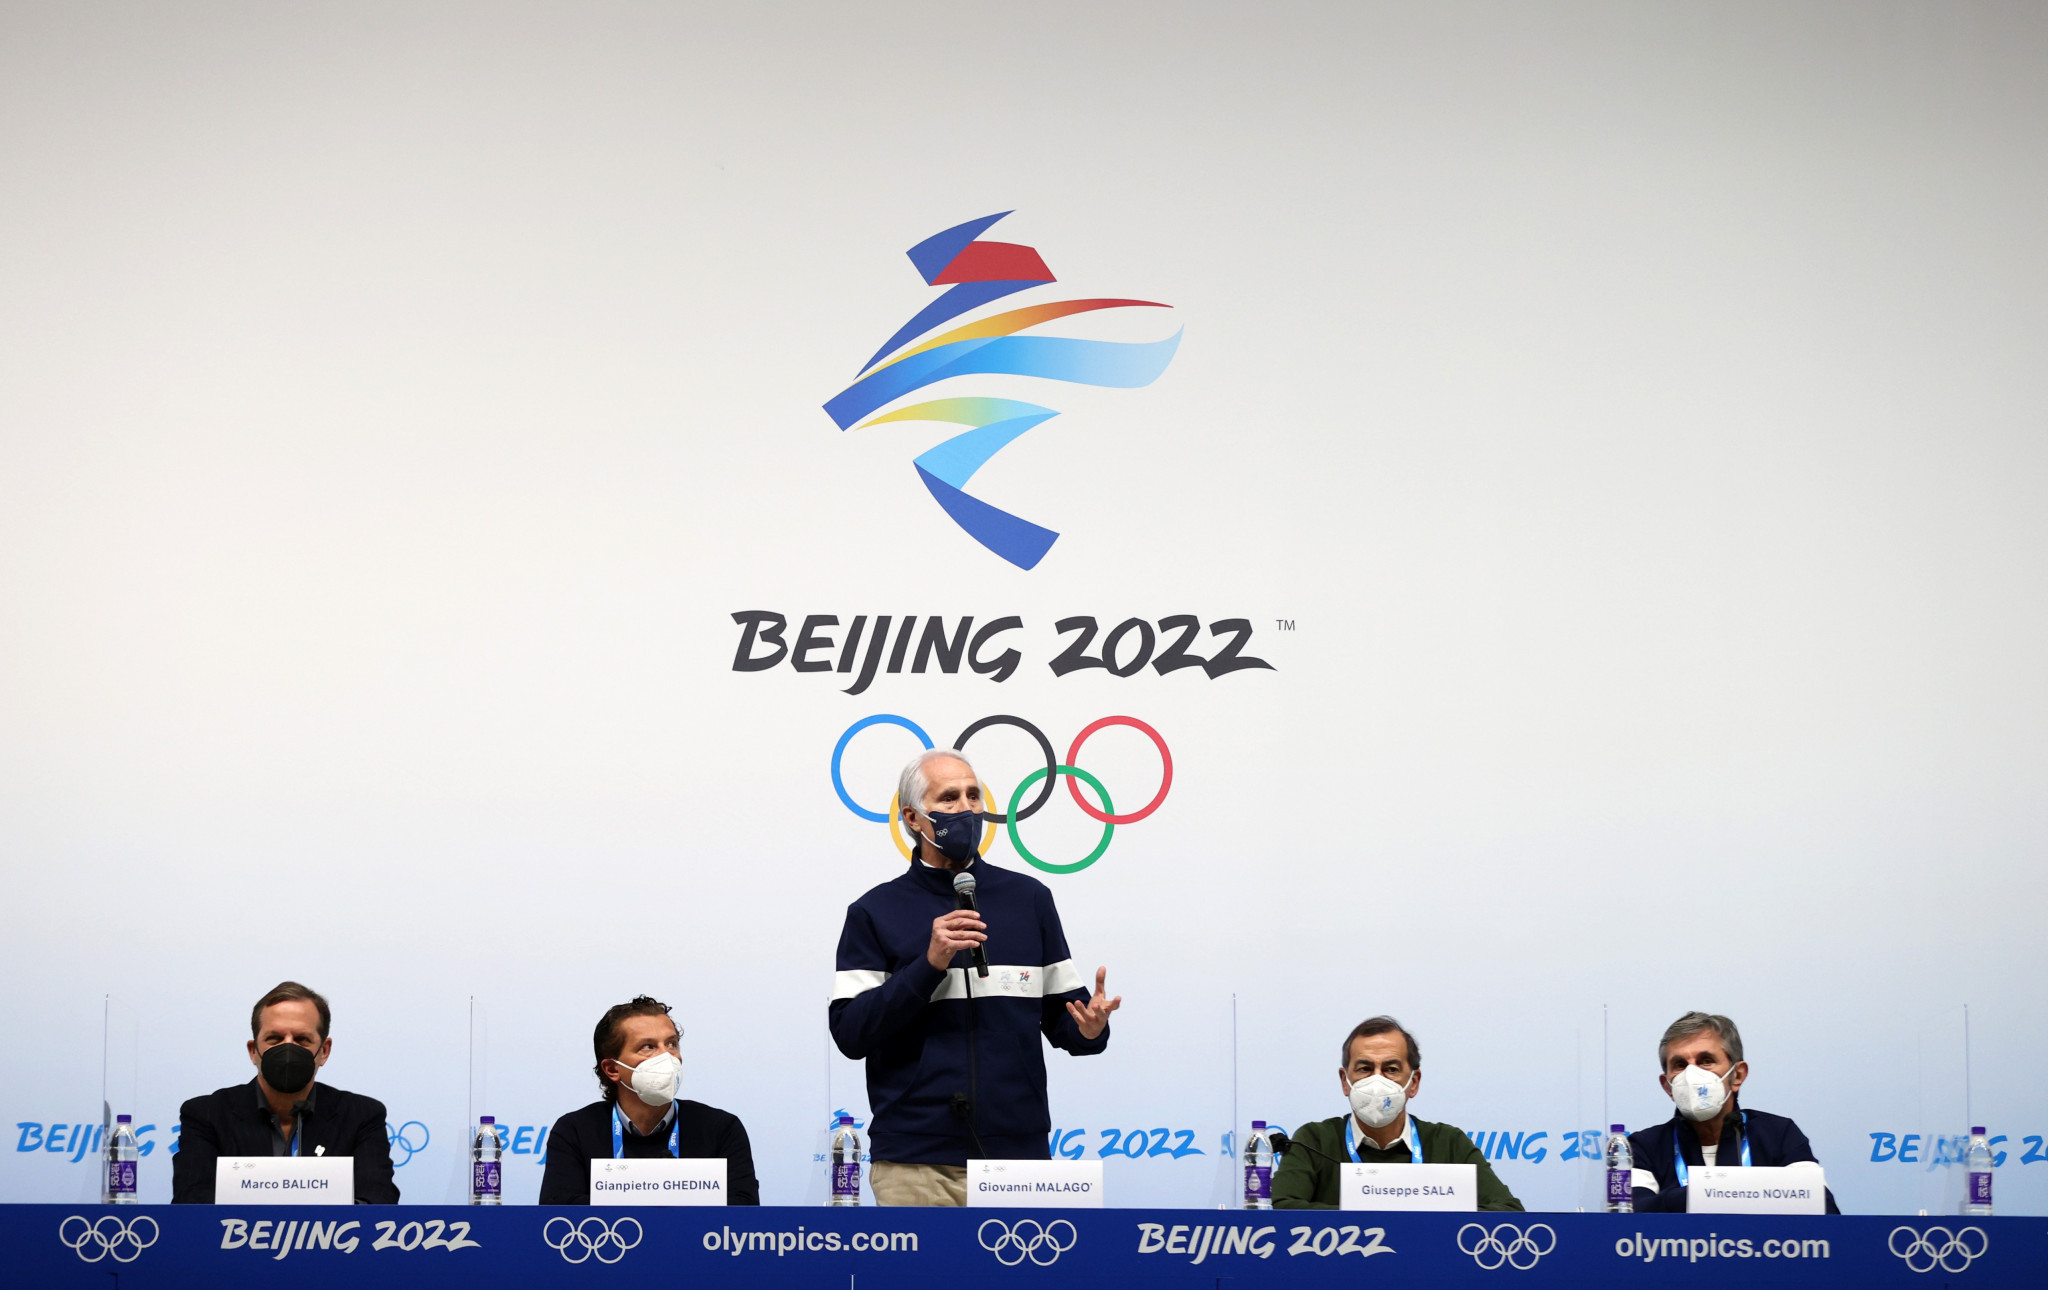 Milan Cortina 2026 President Giovanni Malagò is confident of delivering a successful Winter Olympics despite admitting that they faced logistical challenges ©Getty Images